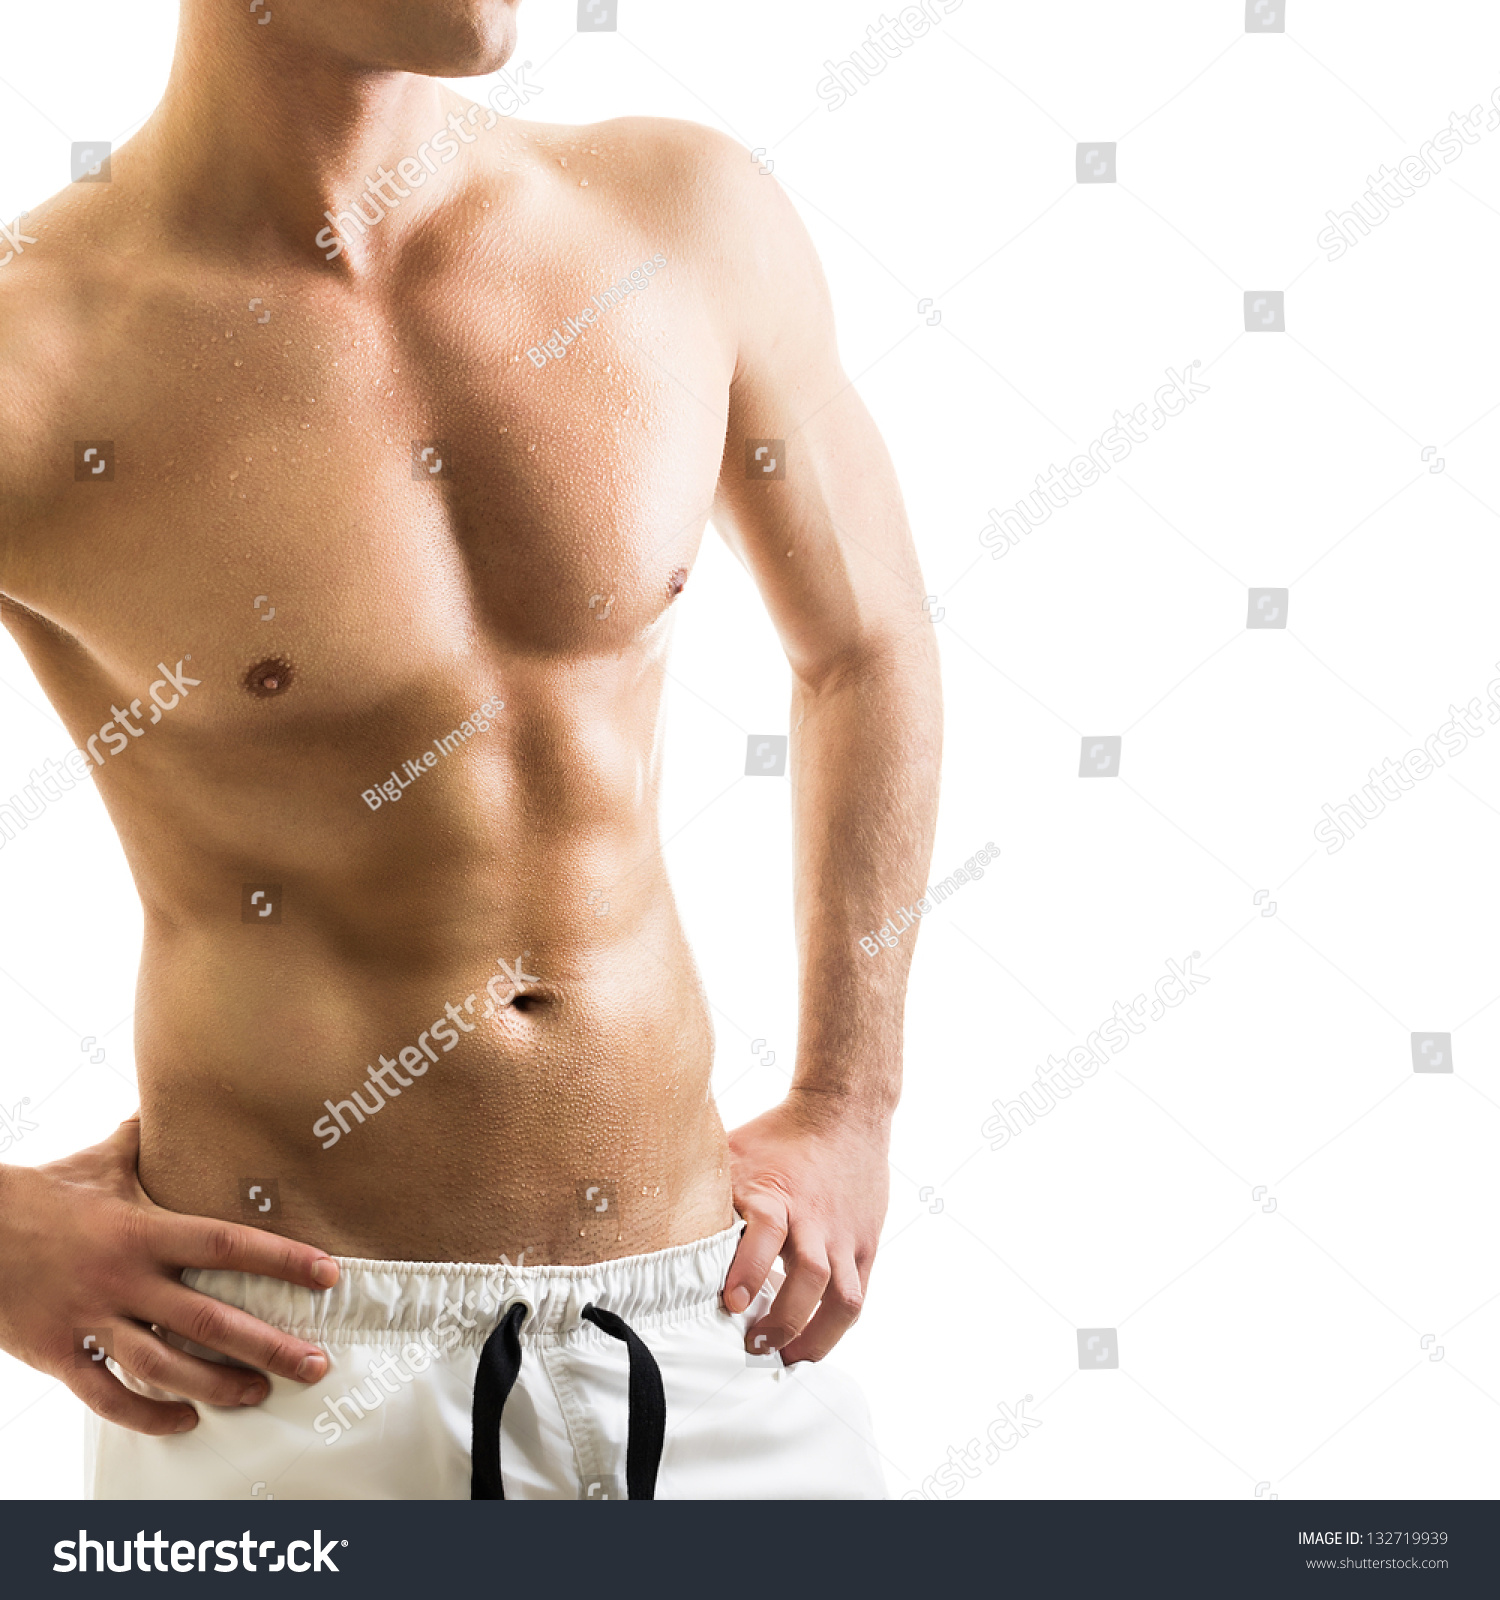 Handsome Shirtless Young Man Stock Photo 132719939 - Shutterstock